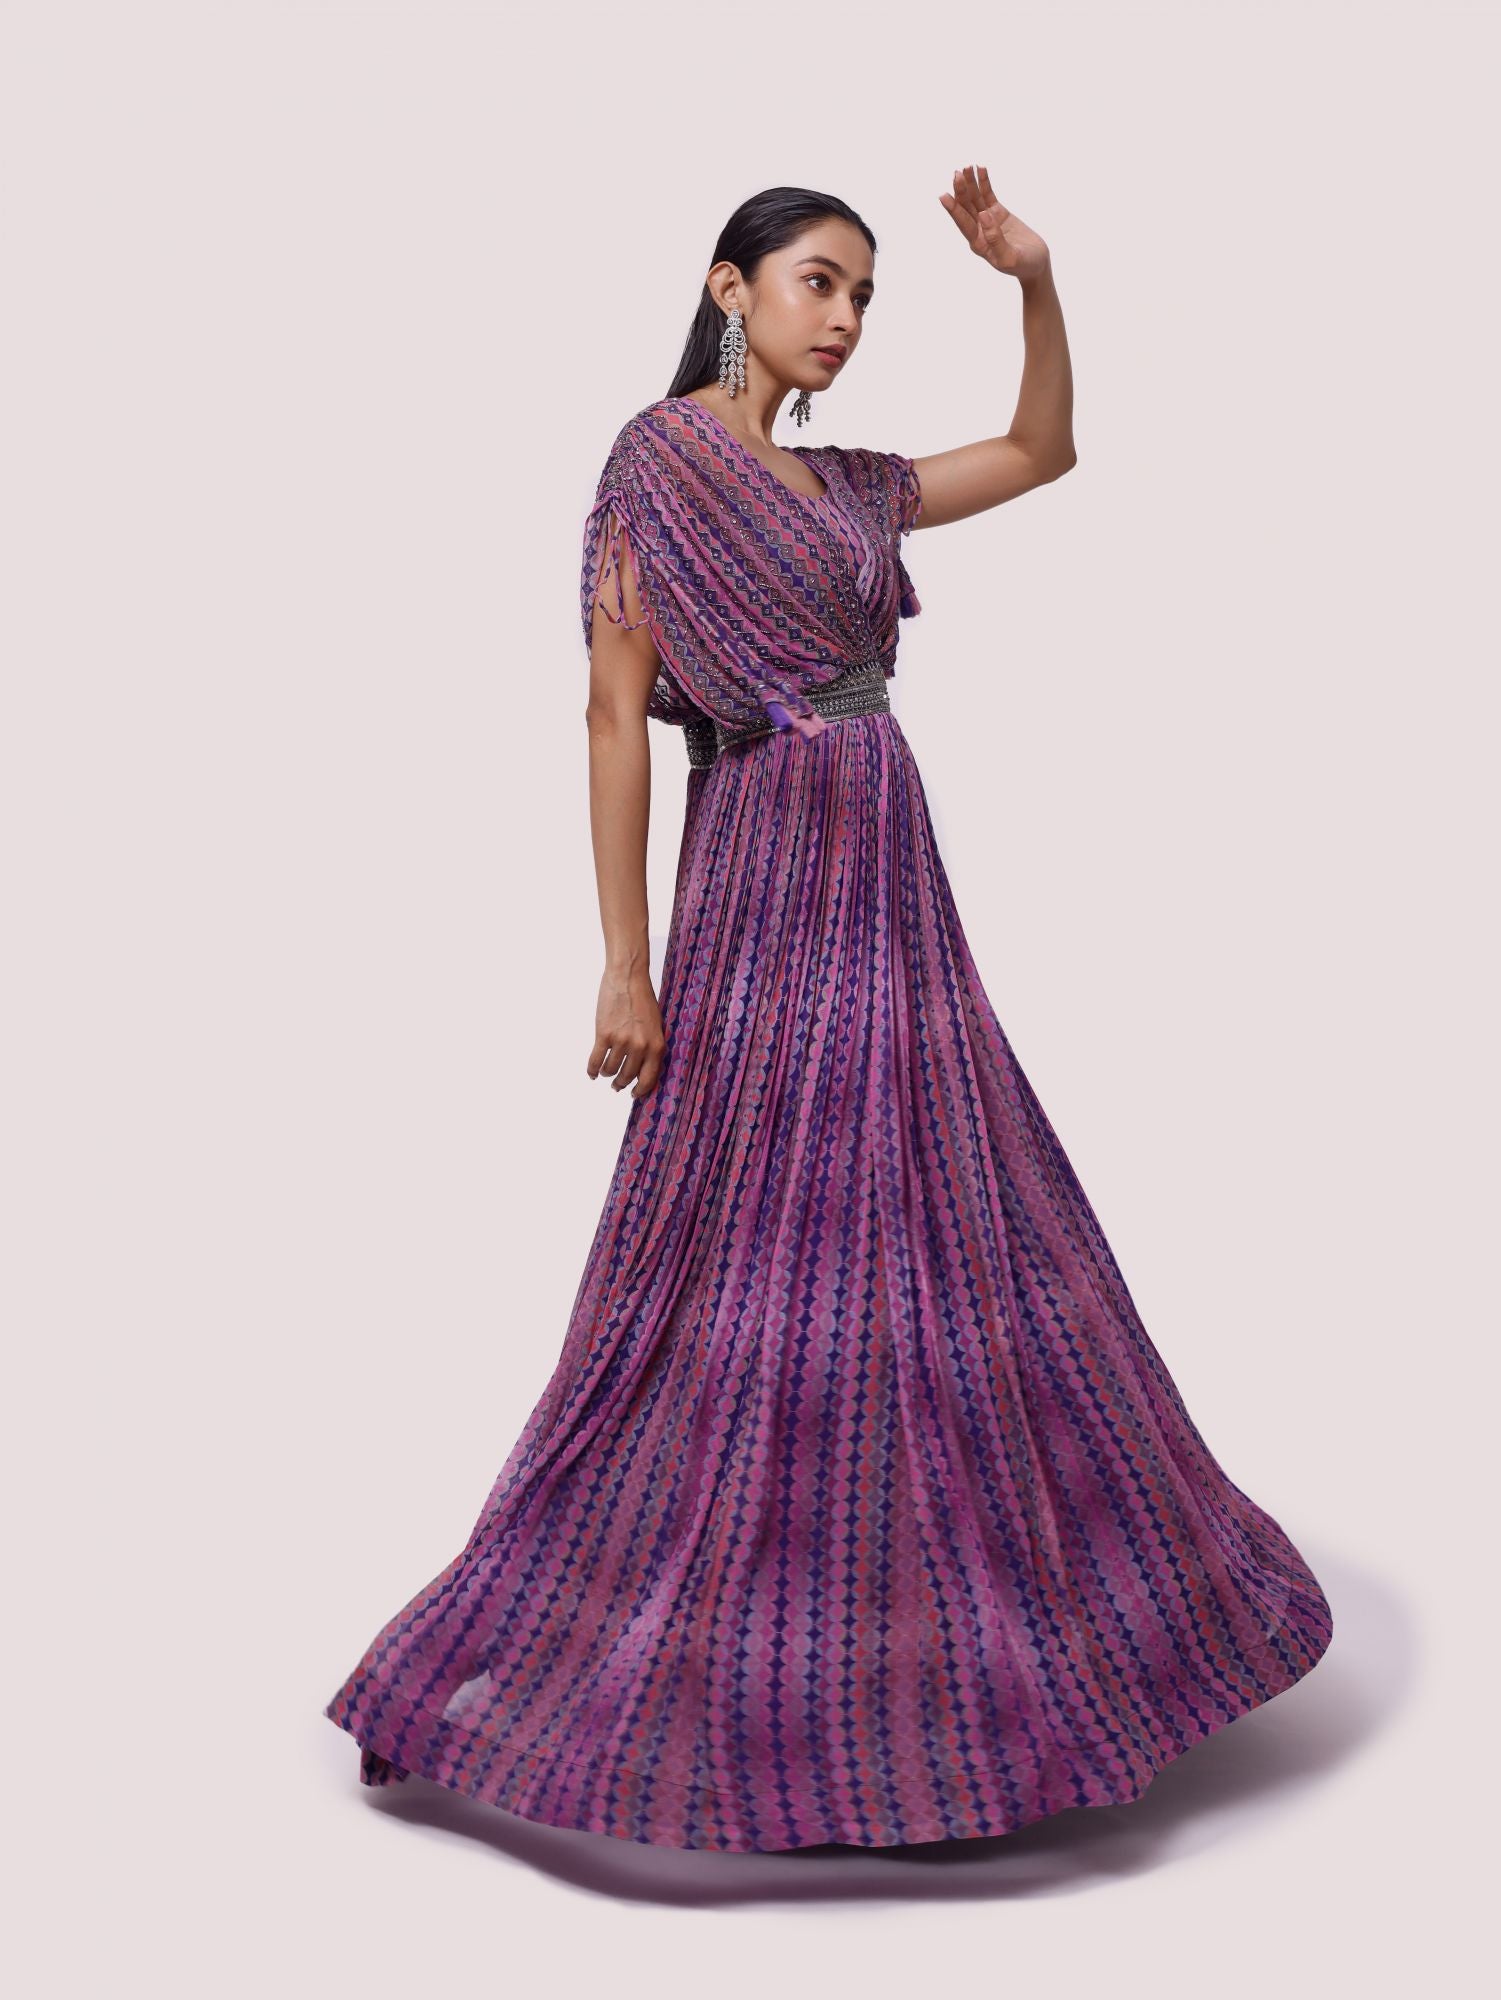 Buy purple printed cutdana and sequin work georgette gown online in USA. Shop the best and latest designs in embroidered sarees, designer sarees, Anarkali suit, lehengas, sharara suits for weddings and special occasions from Pure Elegance Indian fashion store in USA.-side